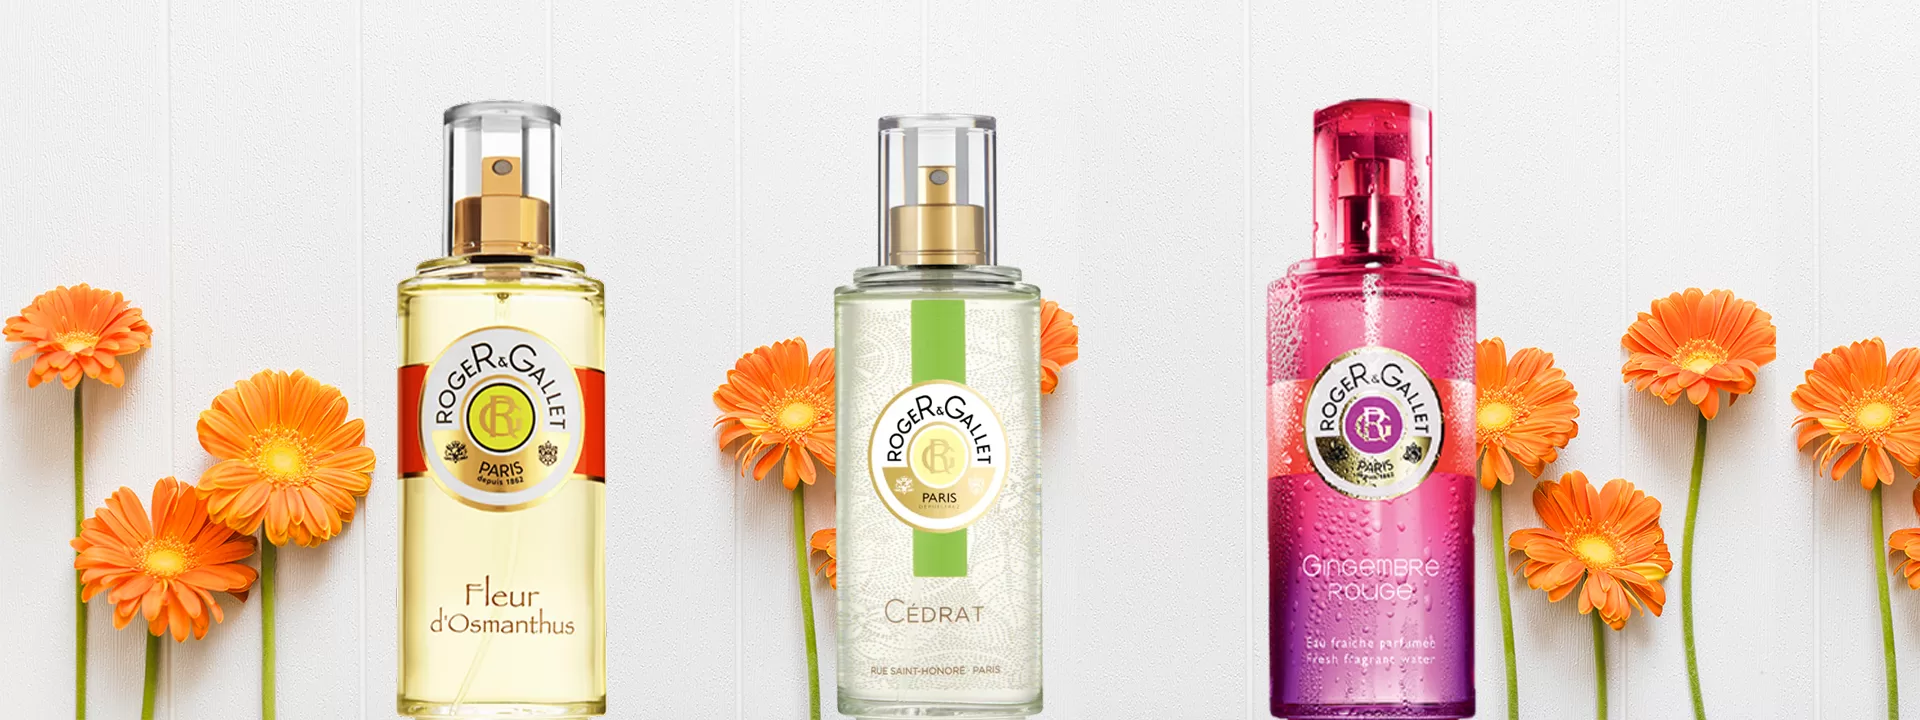 The Ultimate Guide To The Roger & Gallet Fragrances | SOKI LONDON